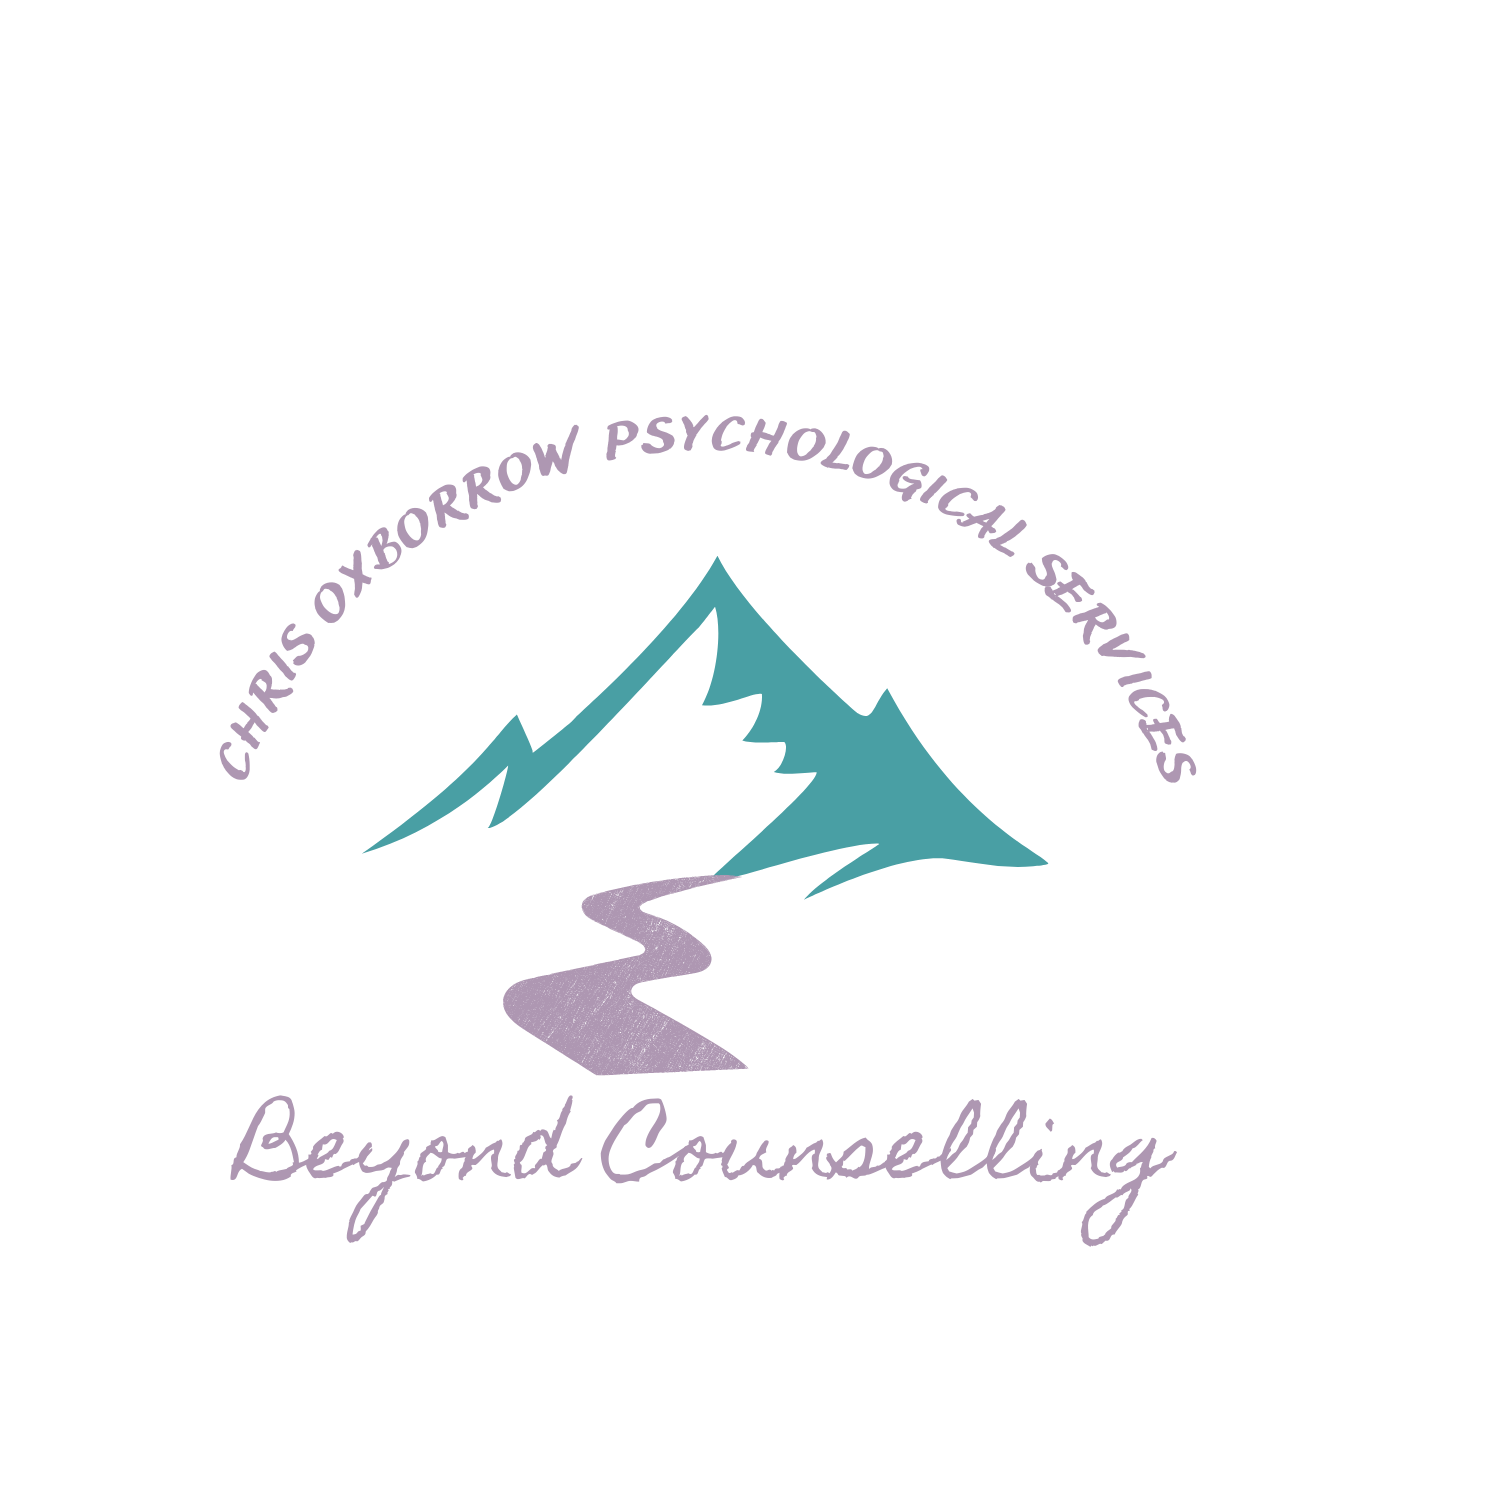 Beyond Counselling